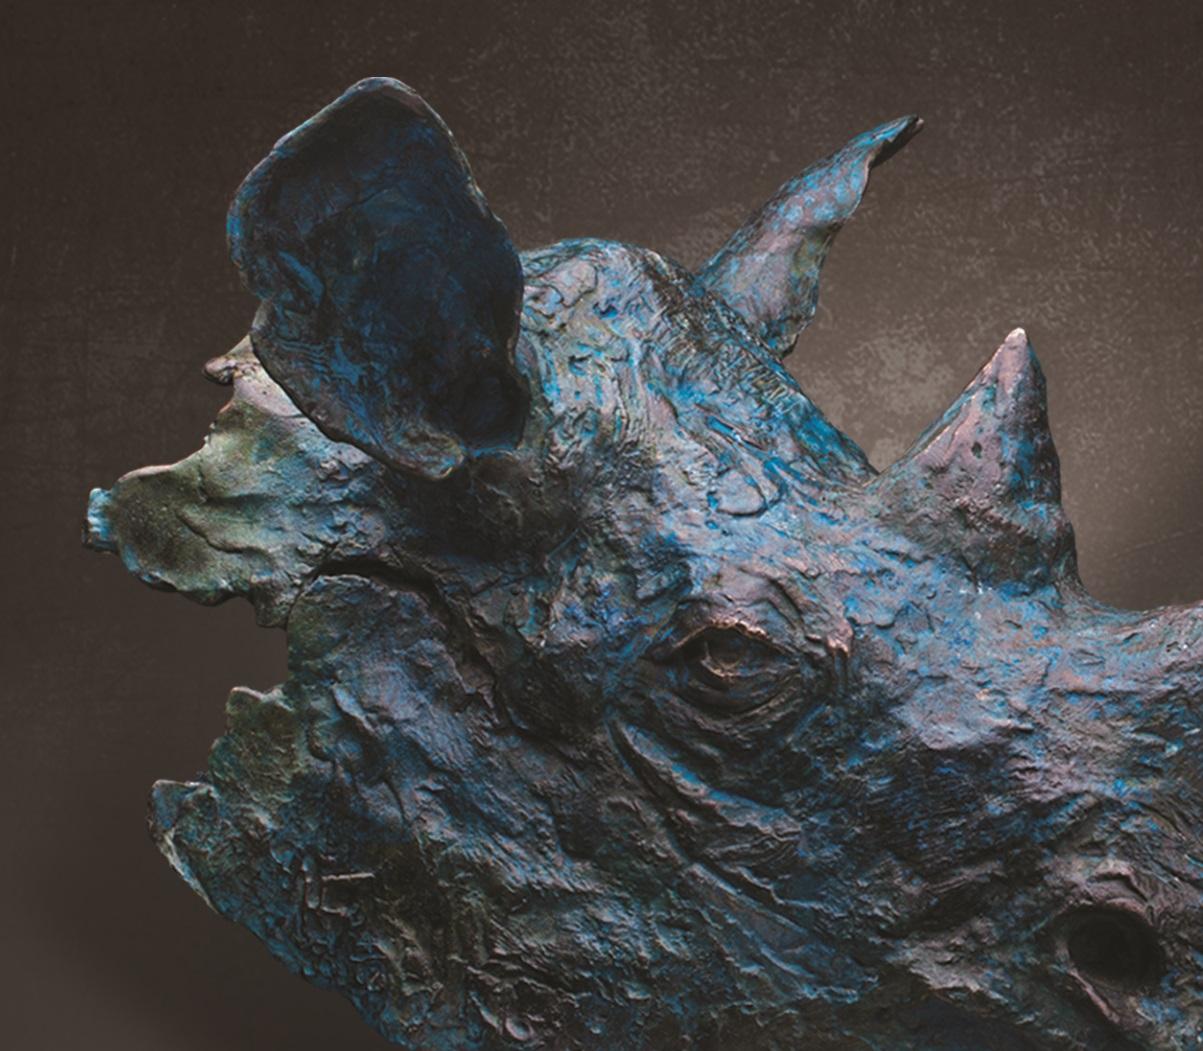 Black Rhino Bust in Bronze Blue Verdigris patina, Limited Edition of 12, bronze sculpture on Sandstone base. The first time I was sculpting in the field, all I saw oft this magnificent Black Rhino was its head sticking out from behind the bush. The